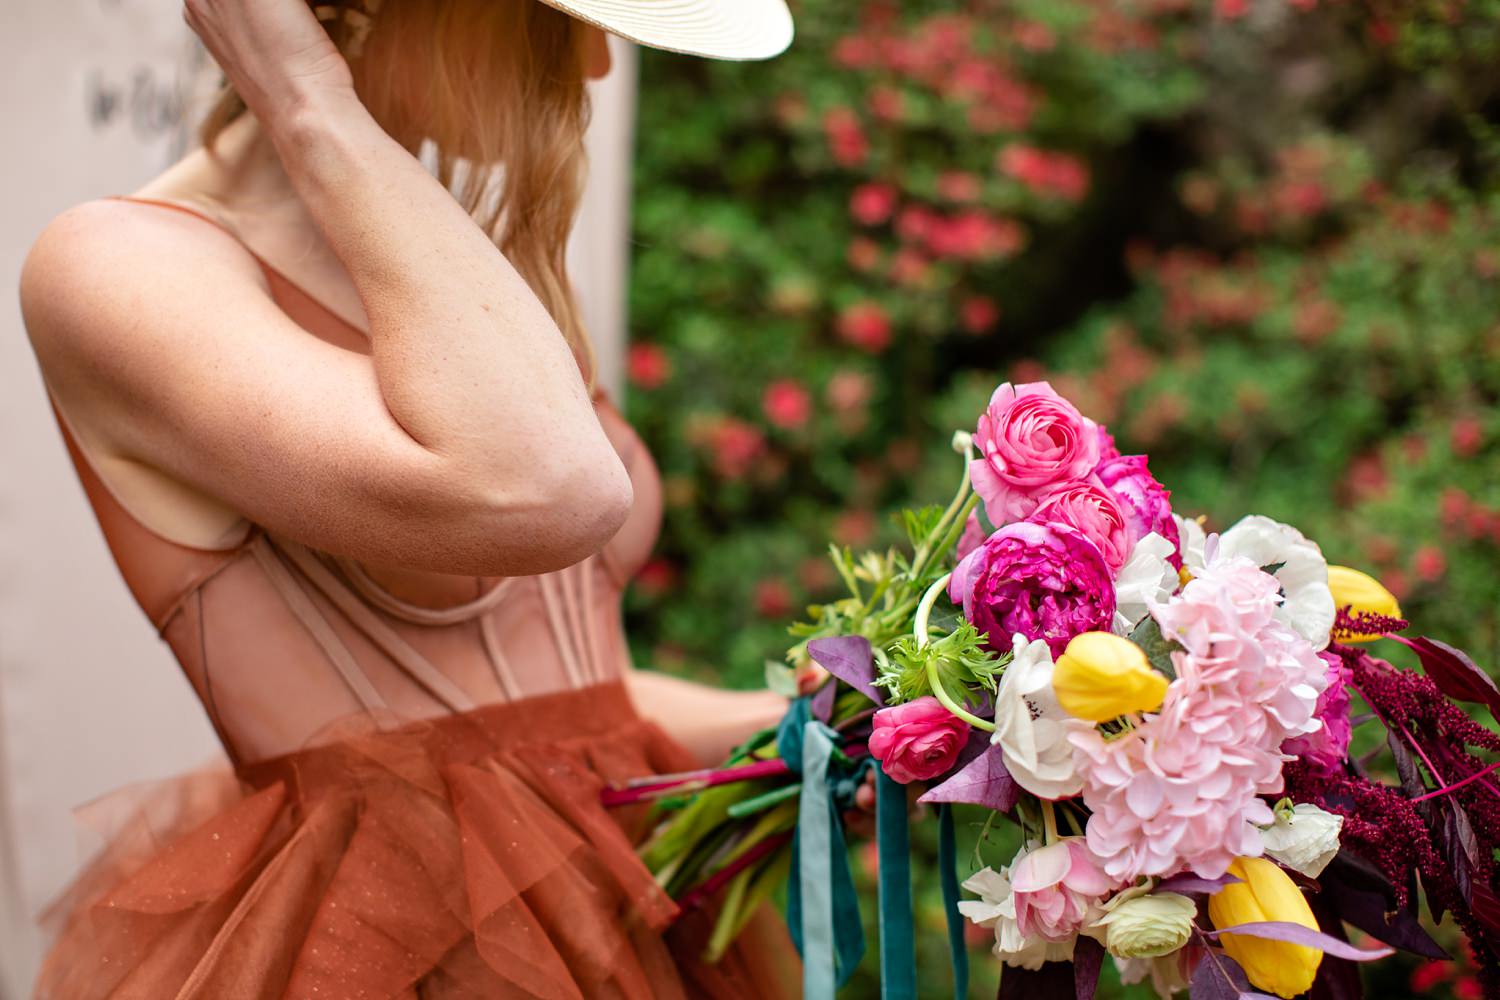 The blonde bride with loose fishtail braid models a colourful bouquet with anemones, country roses and tulips, and an alternative burnt orange wedding dress with straw hat.